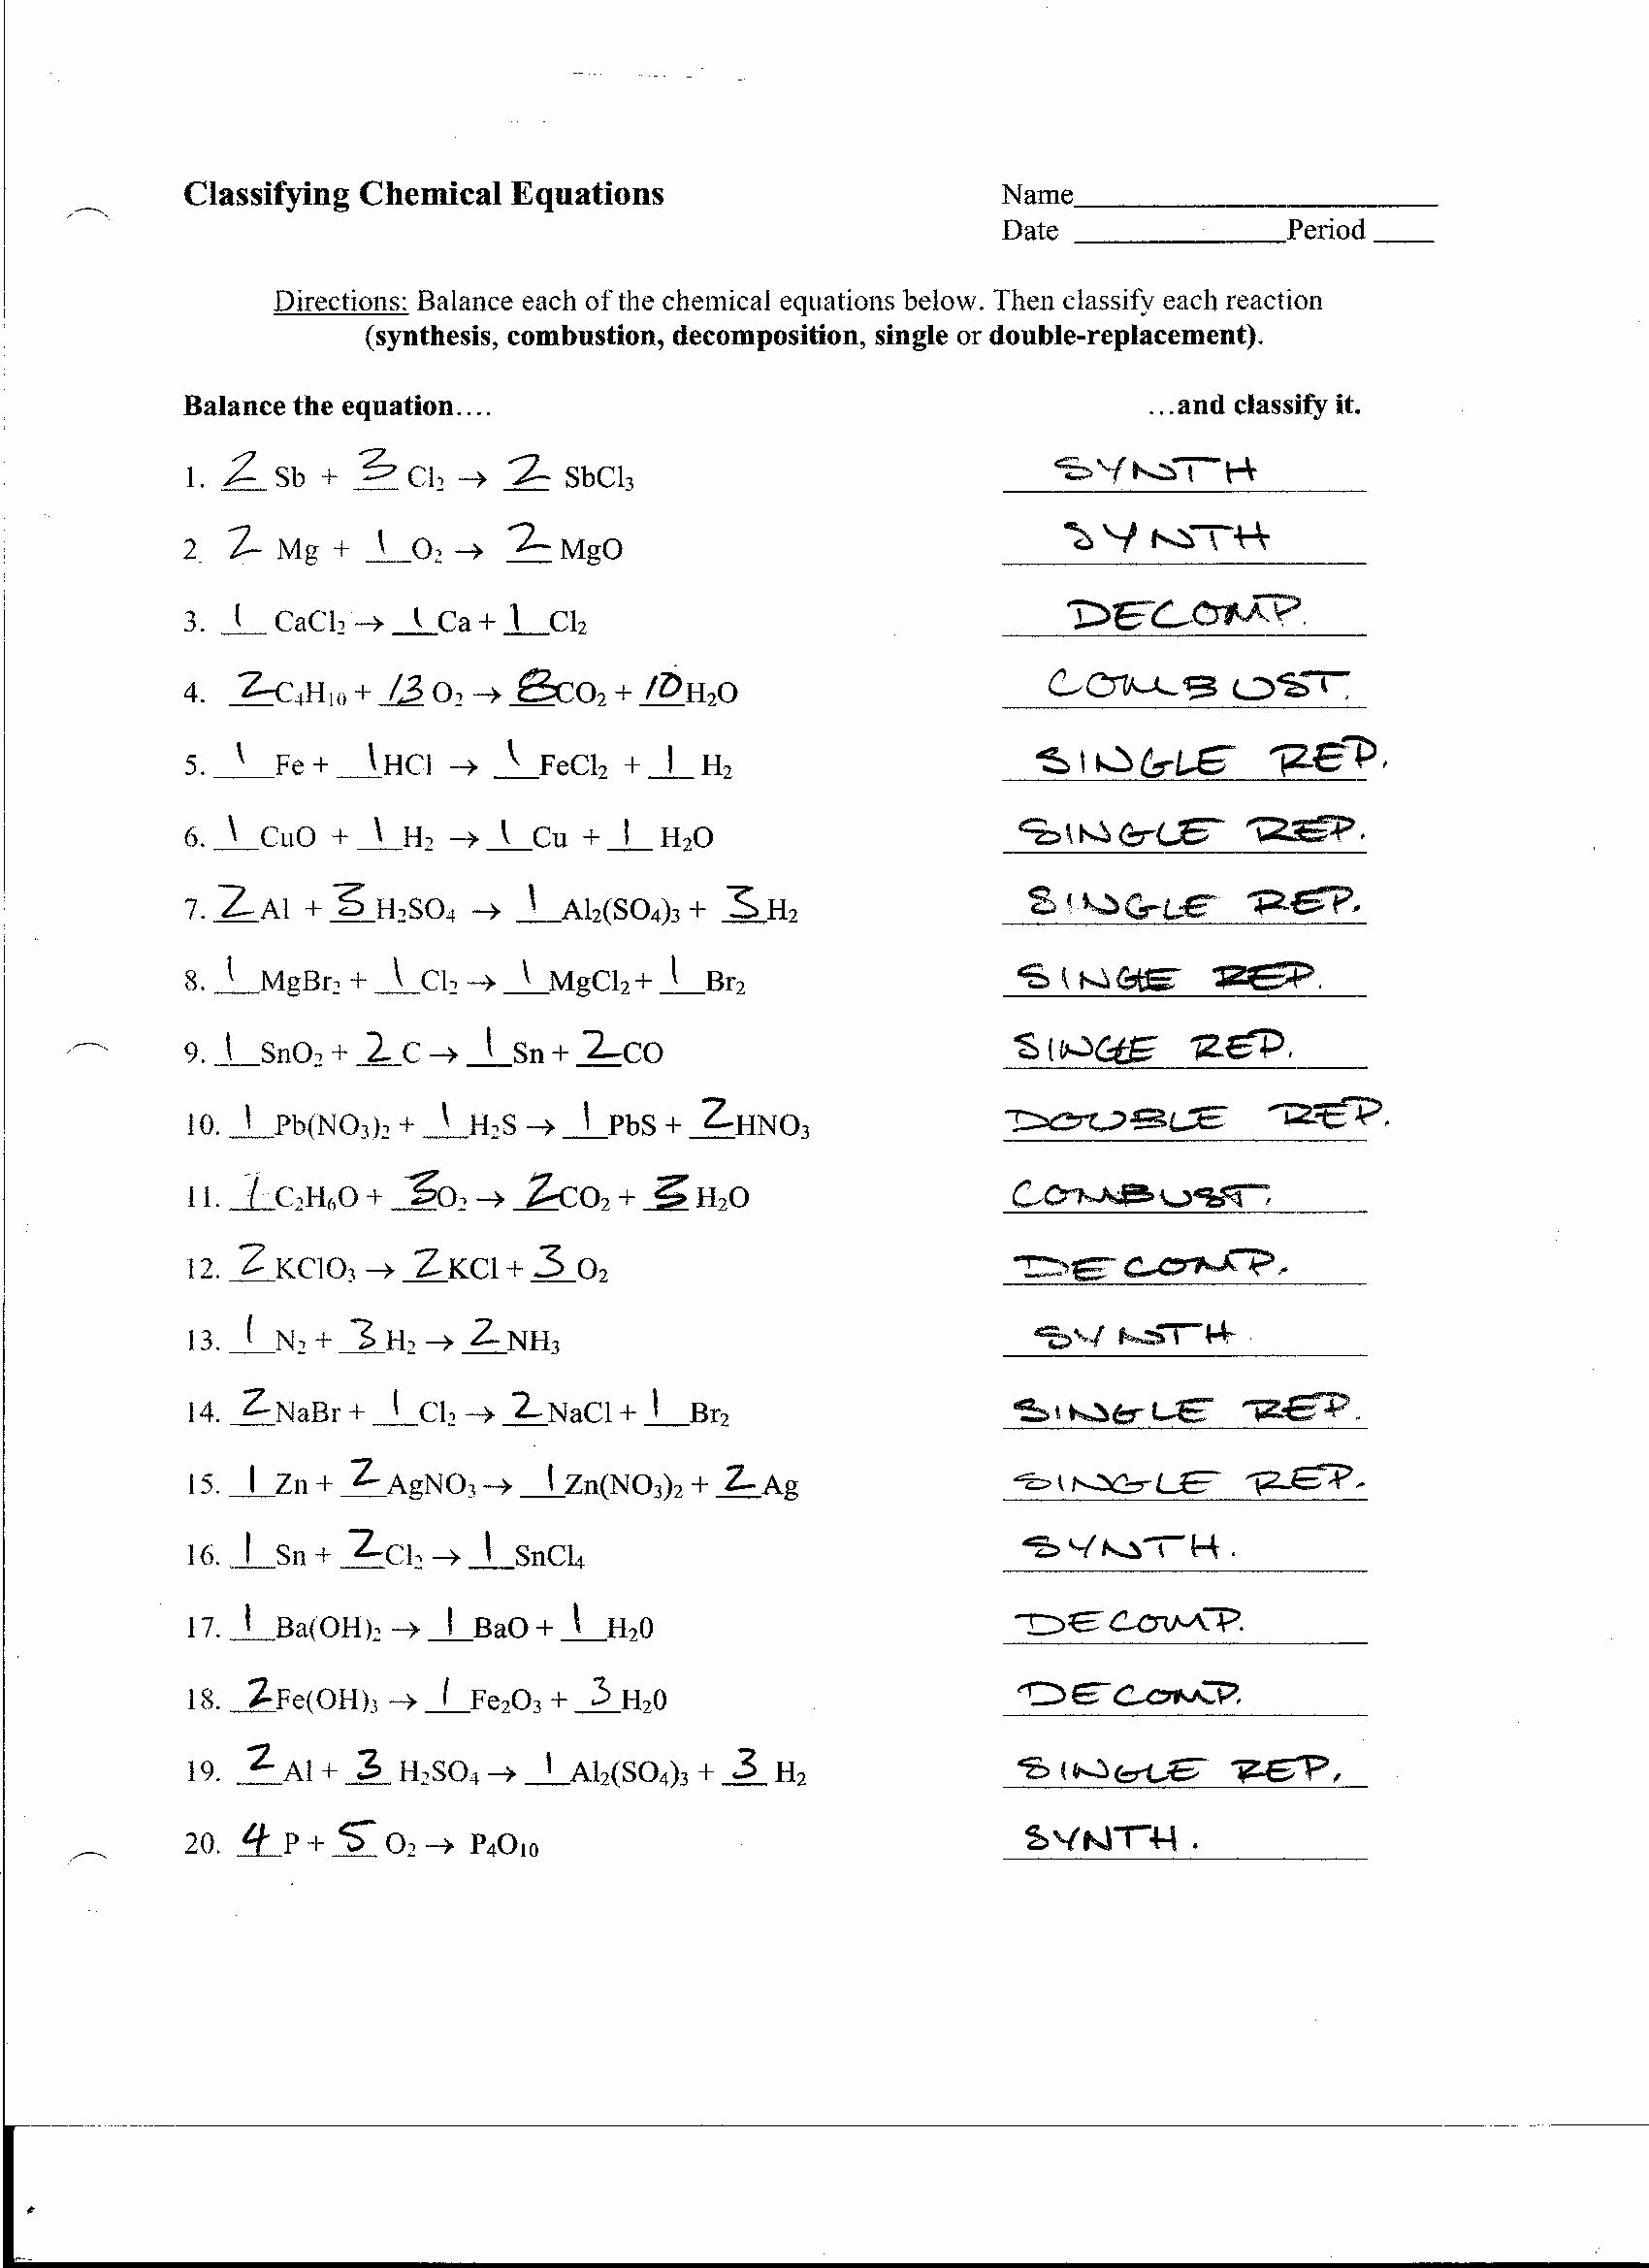 Classification Of Chemical Reactions Worksheet Inspirational Balance and Classify Chemical Equations Calculator